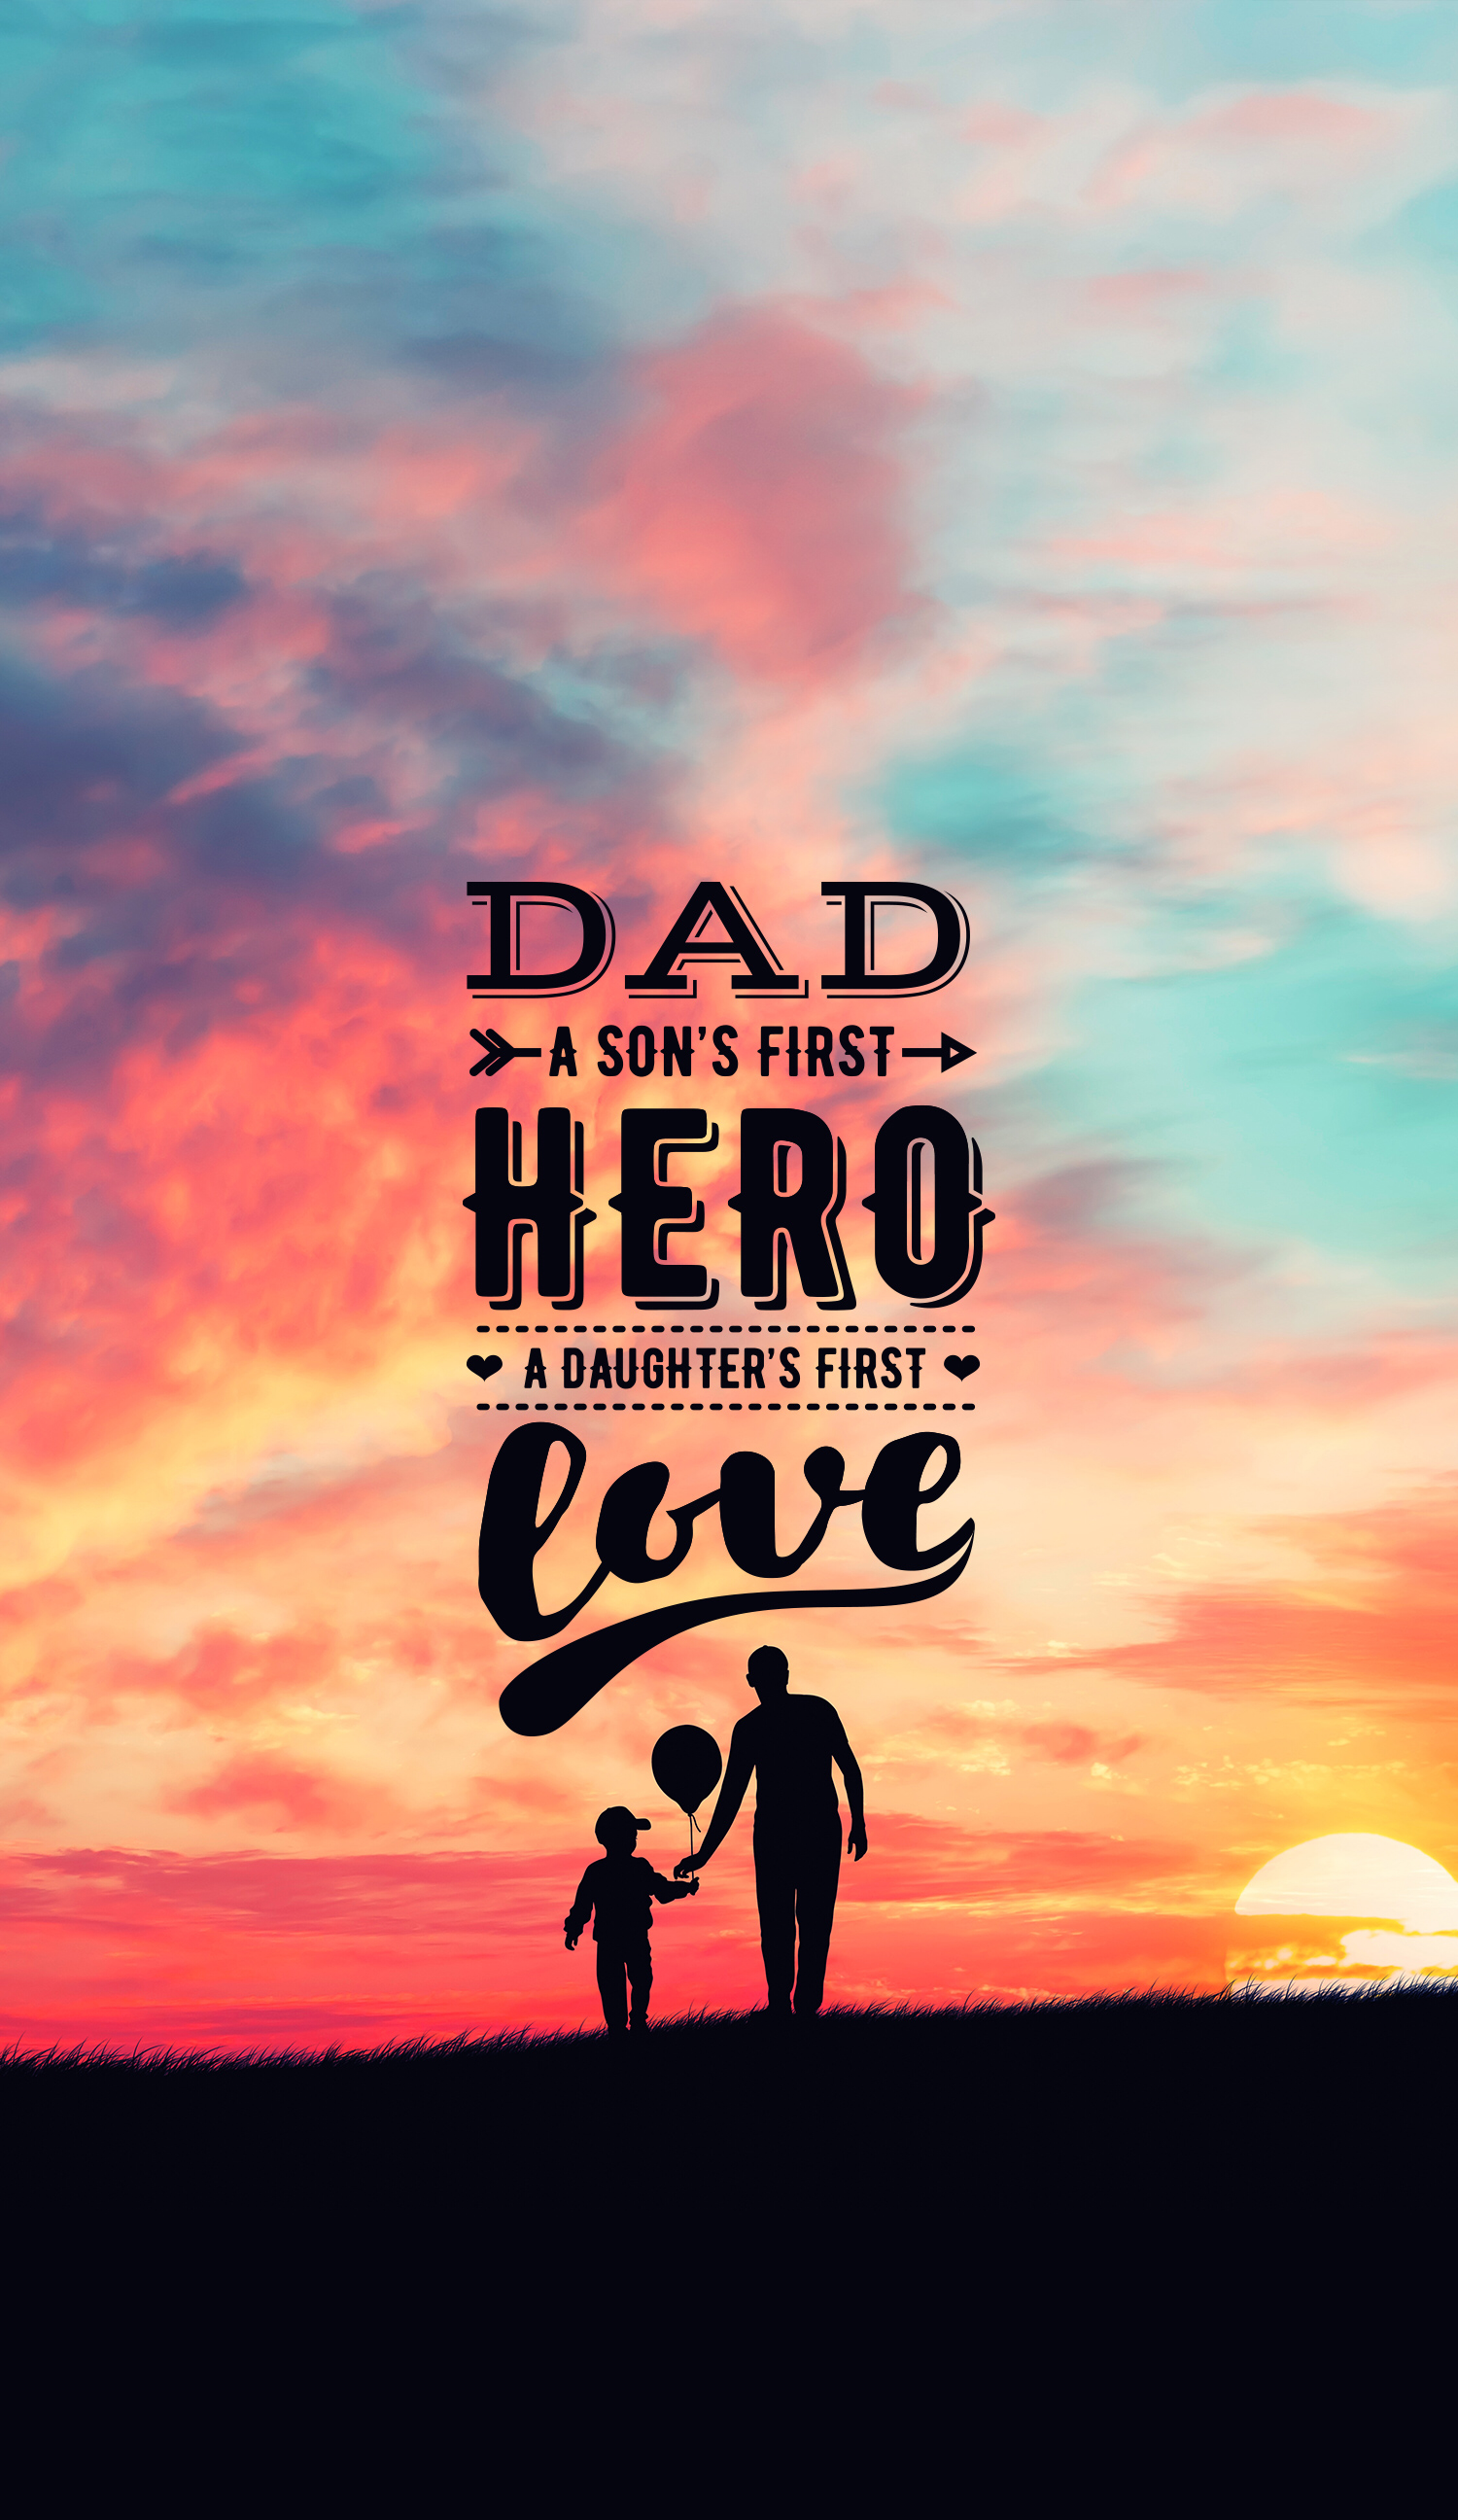 Quotes on father and daughter bond in English with father  daughter hd  wallpapers  JNANA KADALICOM Telugu QuotesEnglish quotesHindi quotesTamil  quotesDharmasandehalu